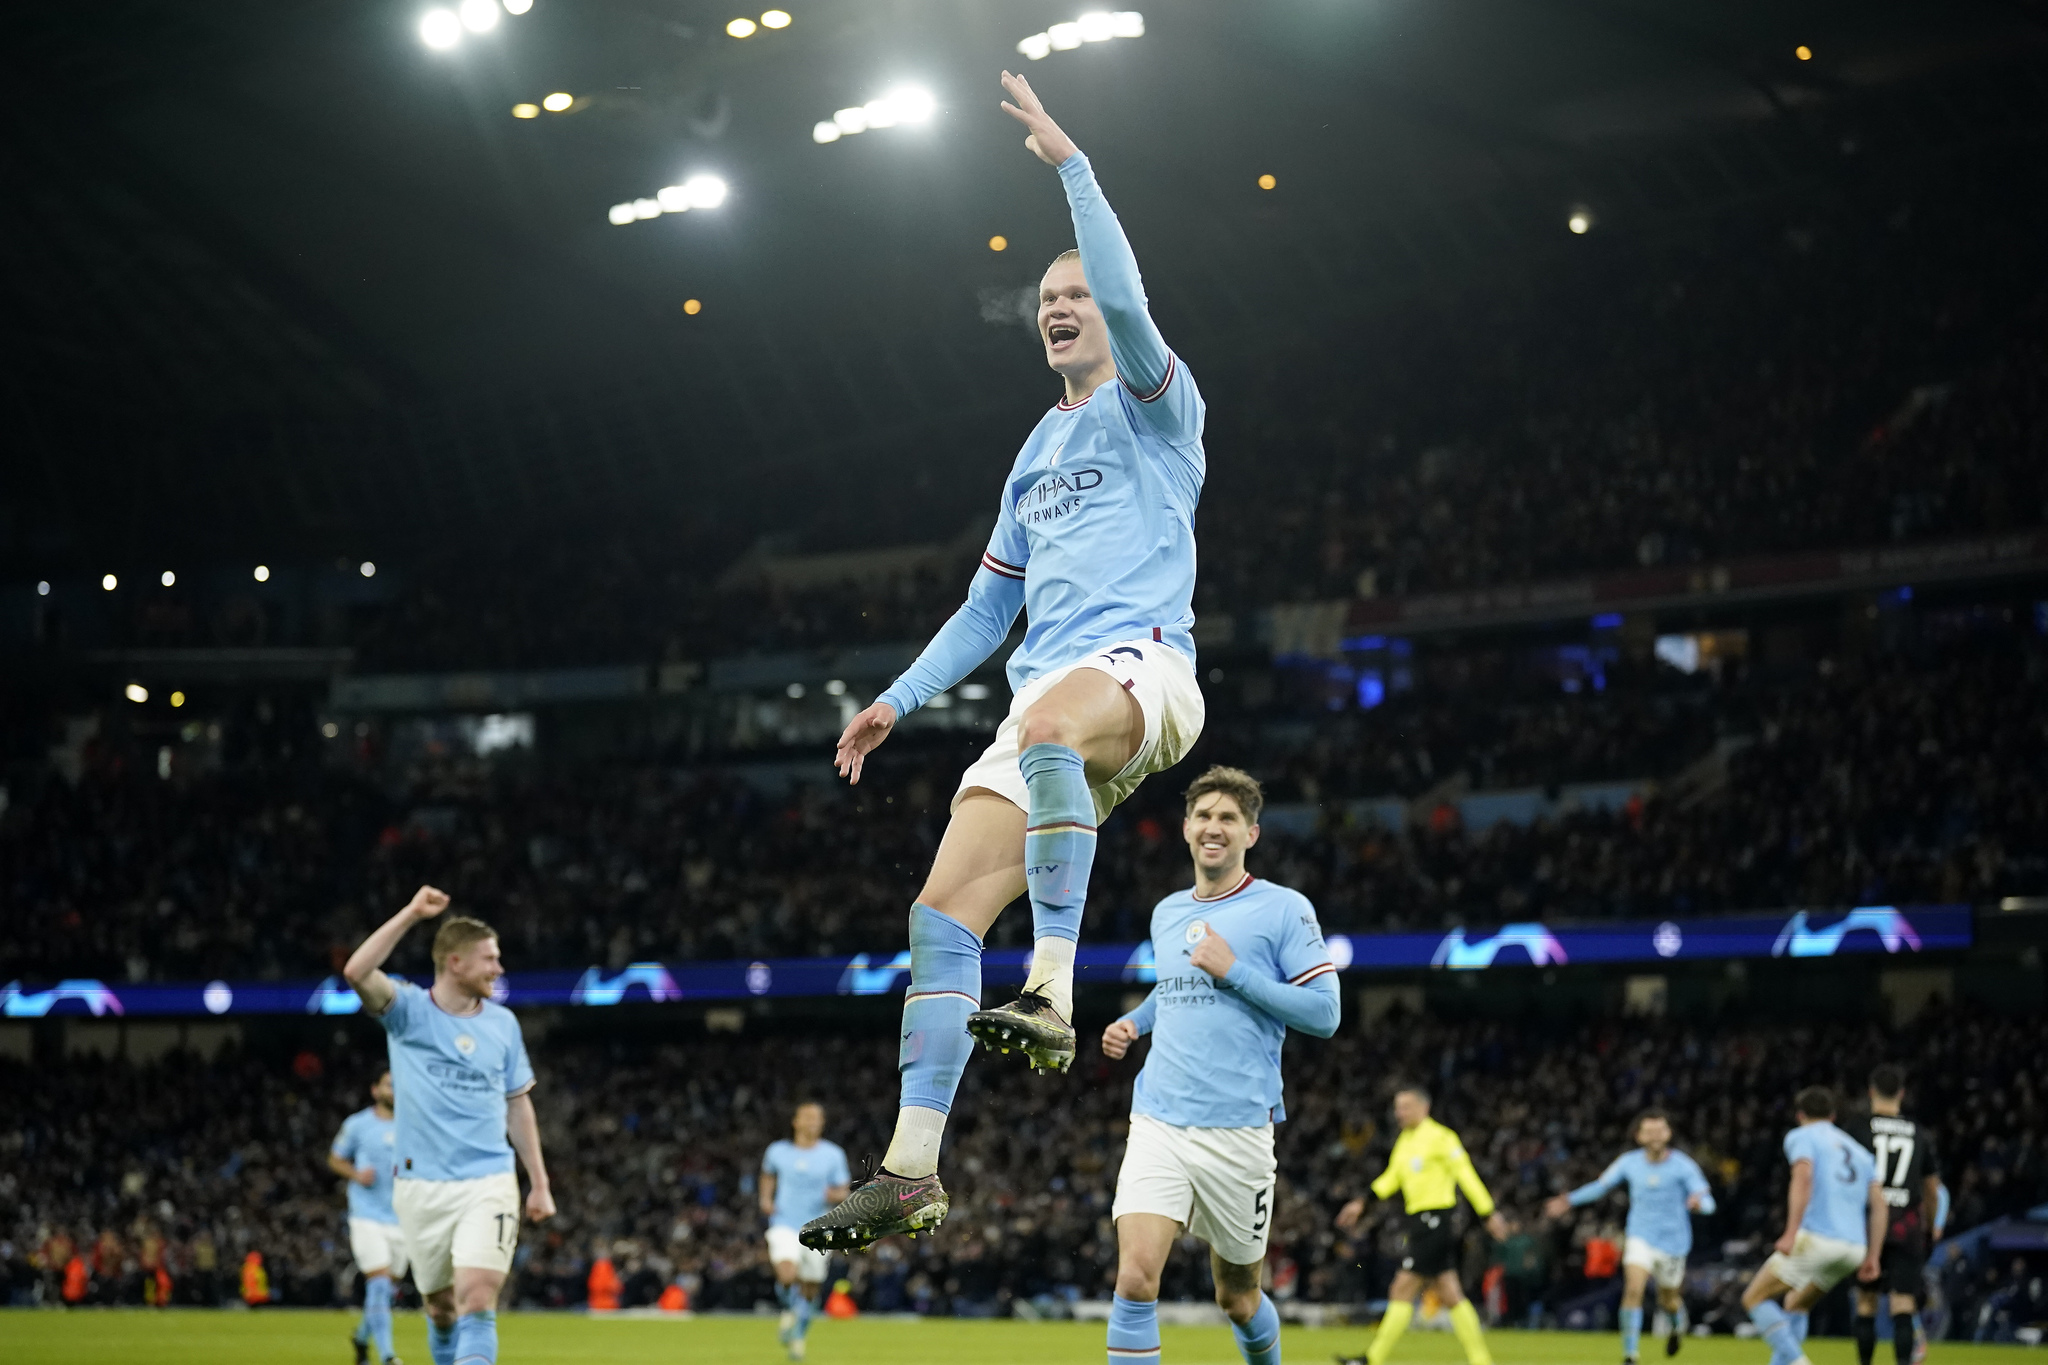 Manchester City's Erling  lt;HIT gt;Haaland lt;/HIT gt; celebrates after scoring his side's 5th goal during the Champions League round of 16 second leg soccer match between Manchester City and RB Leipzig at the Etihad stadium in Manchester, England, Tuesday, March 14, 2023. (AP Photo/Dave Thompson)